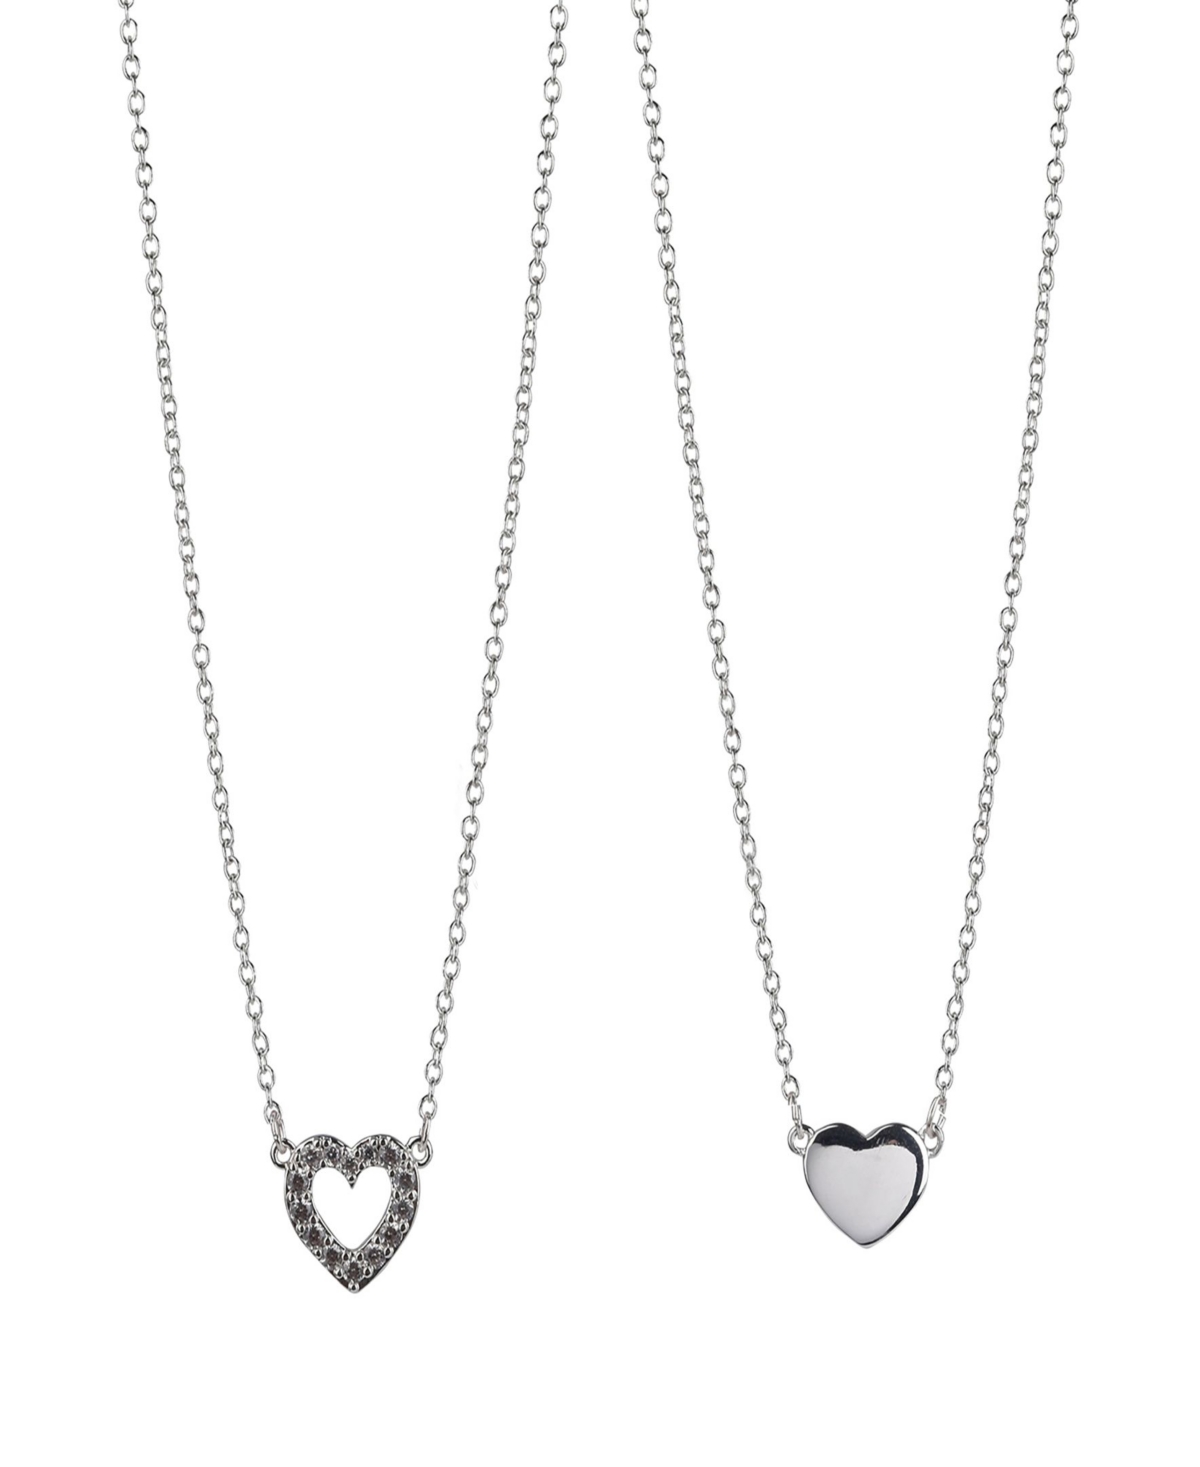 Fao Schwarz Fine Silver Plated Heart Pendant Mommy and Me Necklace Set, 2 Piece